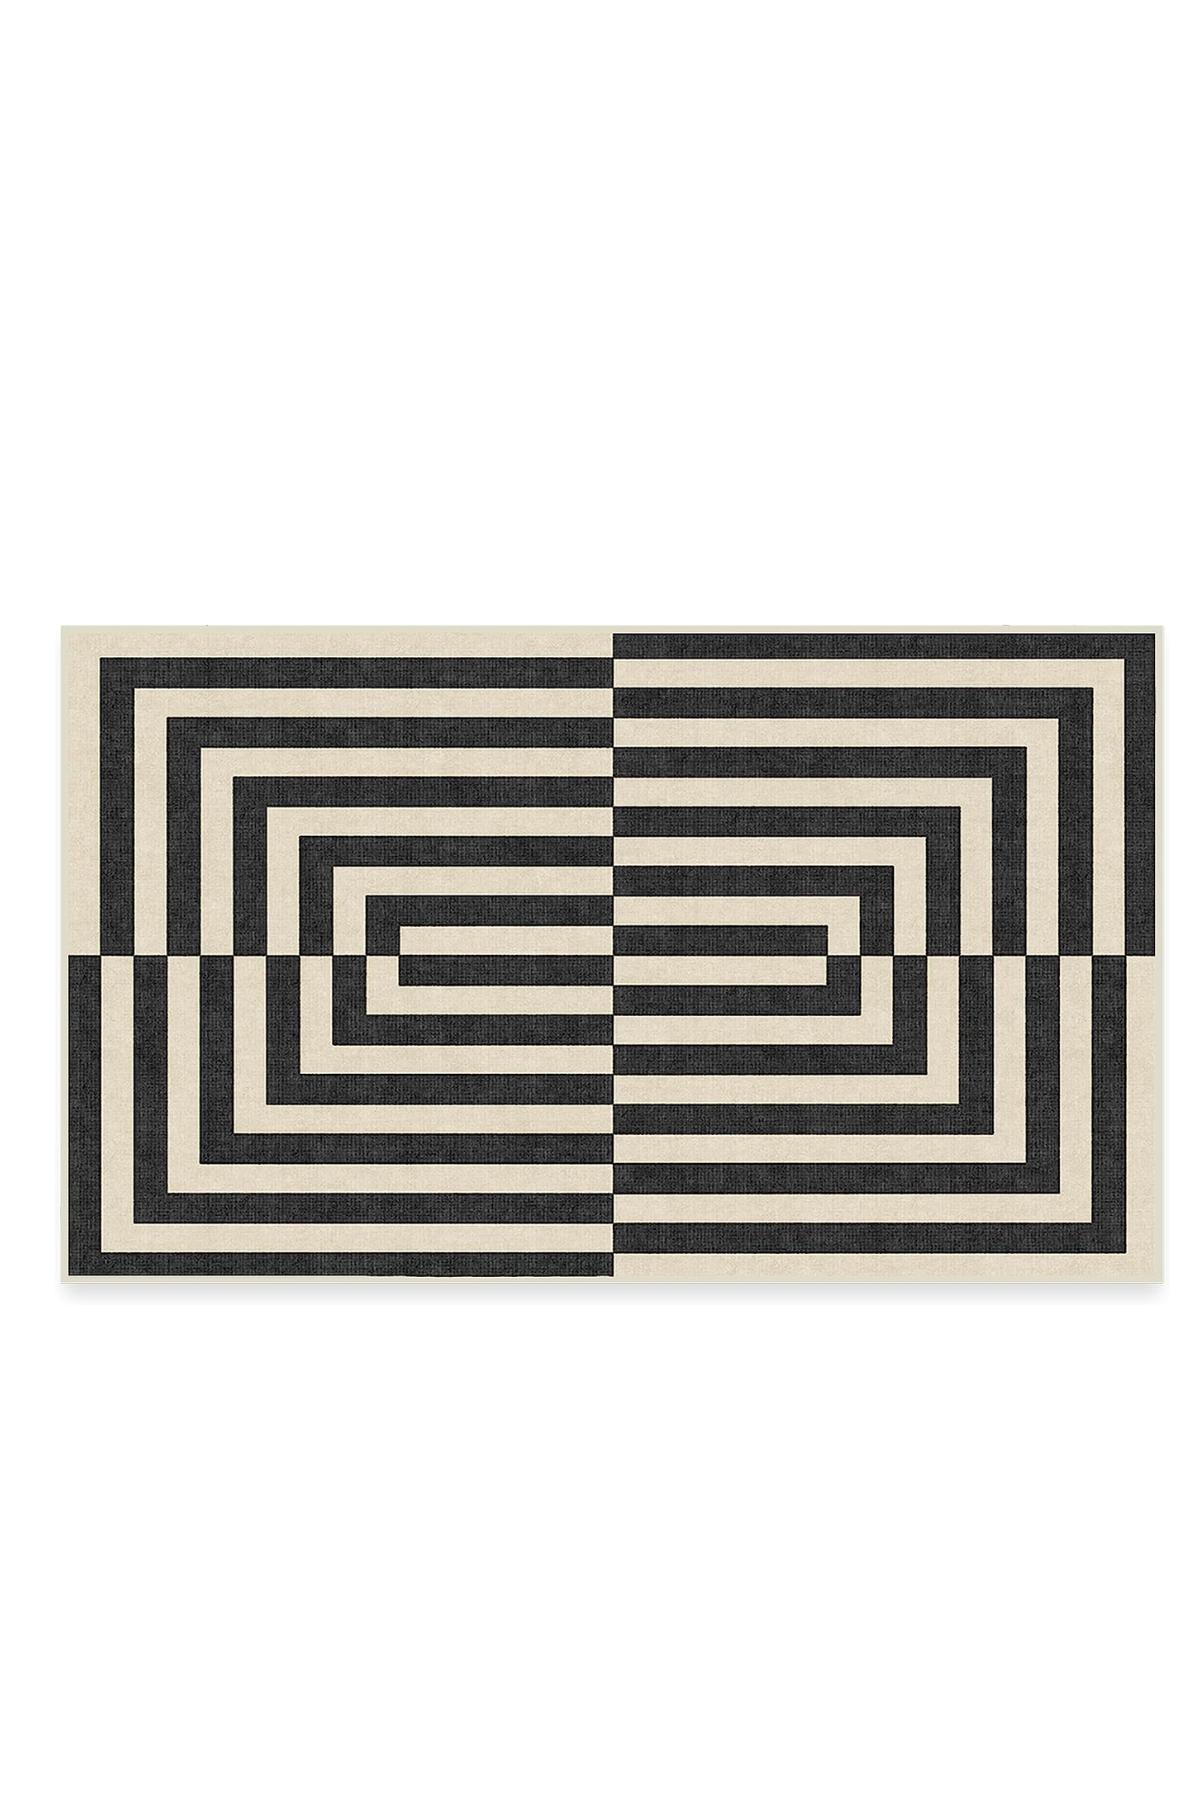 RUGGABLE x Jonathan Adler Washable Rug - Perfect Modern Area Rug for Living Room Bedroom Kitchen - Pet & Child Friendly - Stain & Water Resistant -...